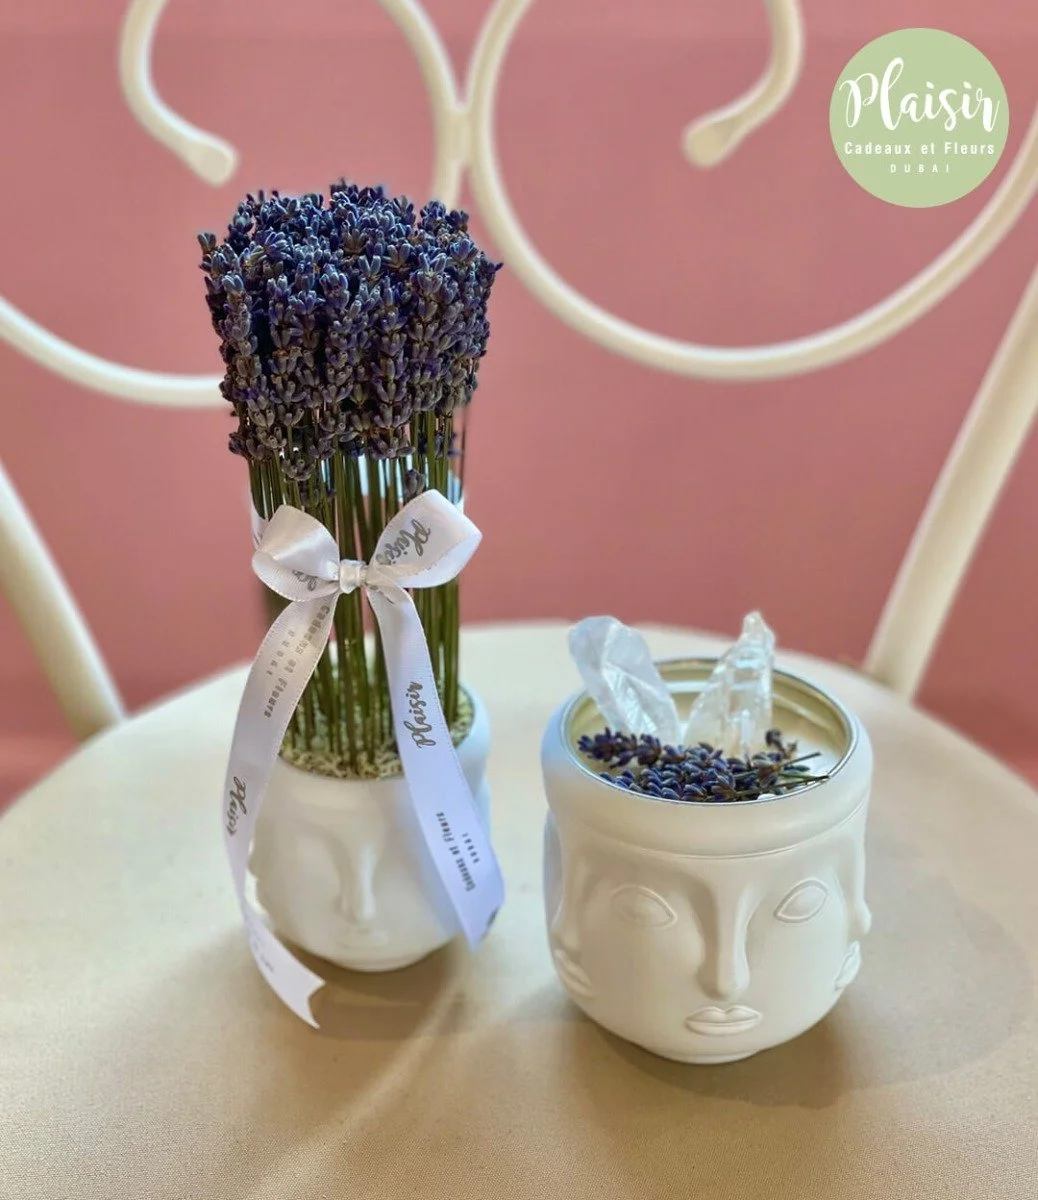 Visage Lavender and Crystal Candle Giftset By Plaisir  By Plaisir